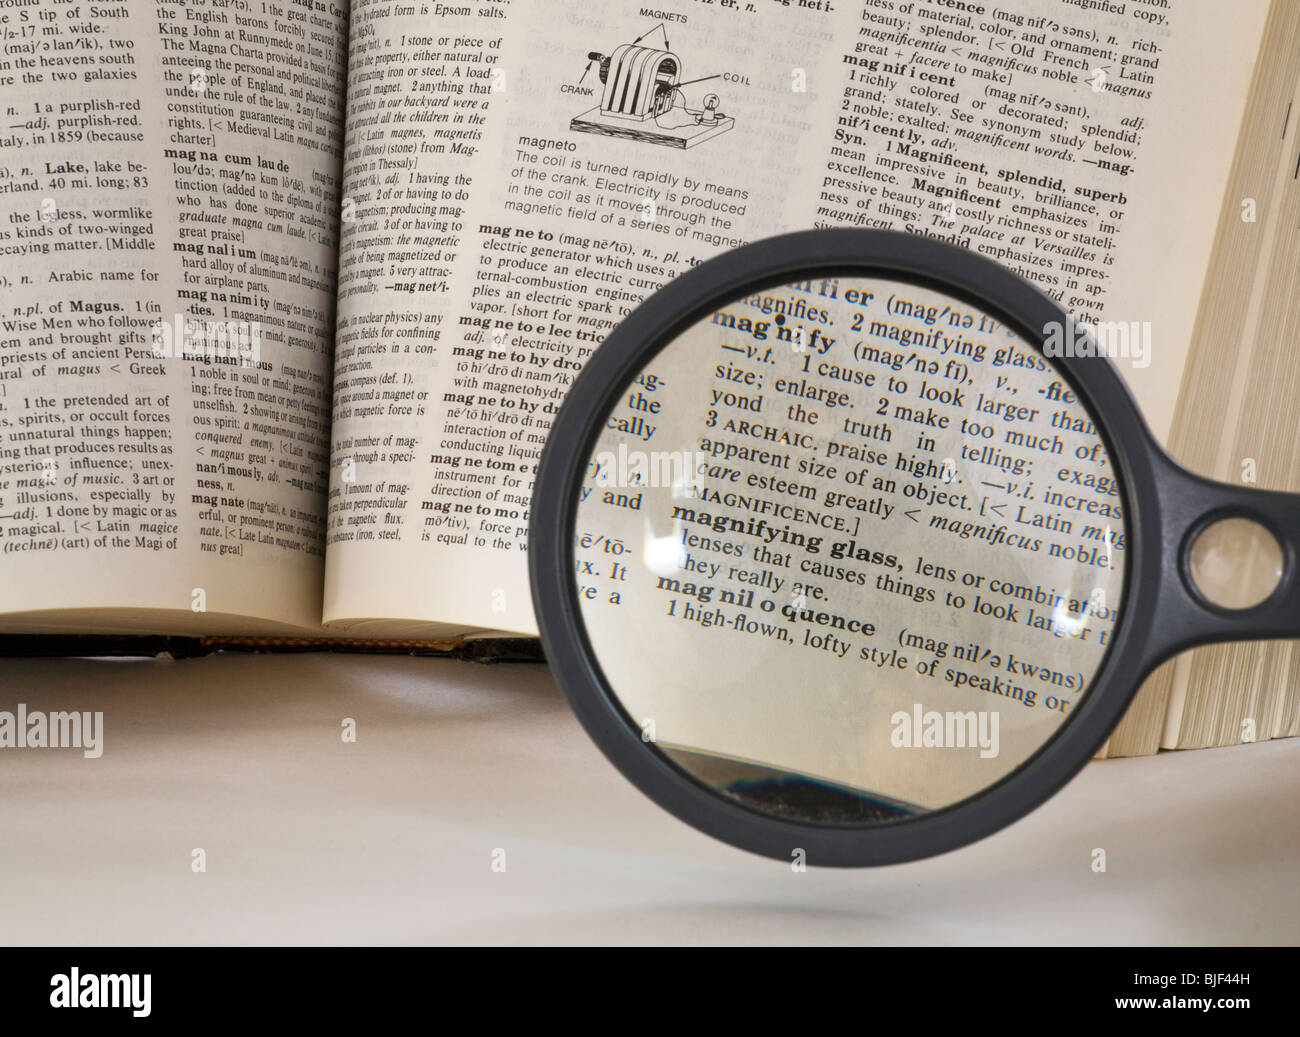 A magnifying glass over the word magnify in an English Dictionary Stock Photo